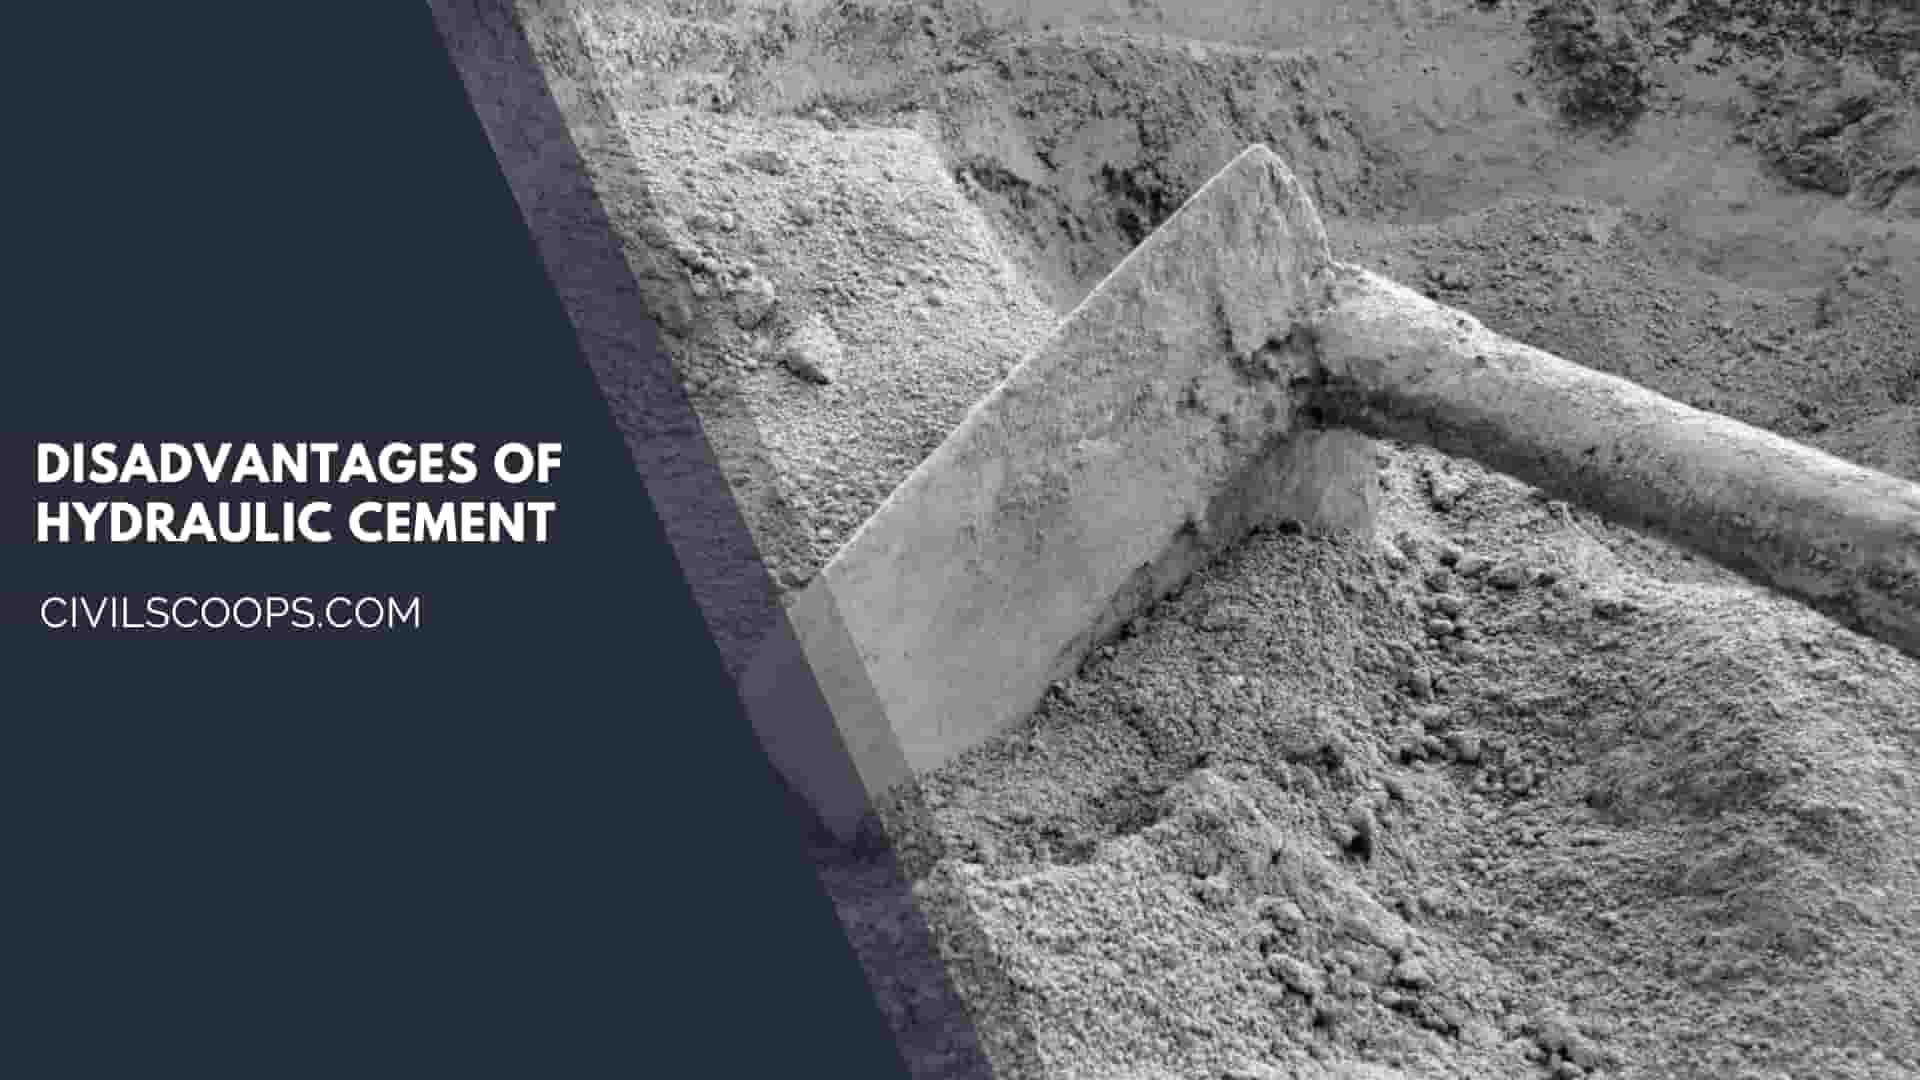 Disadvantages of Hydraulic Cement